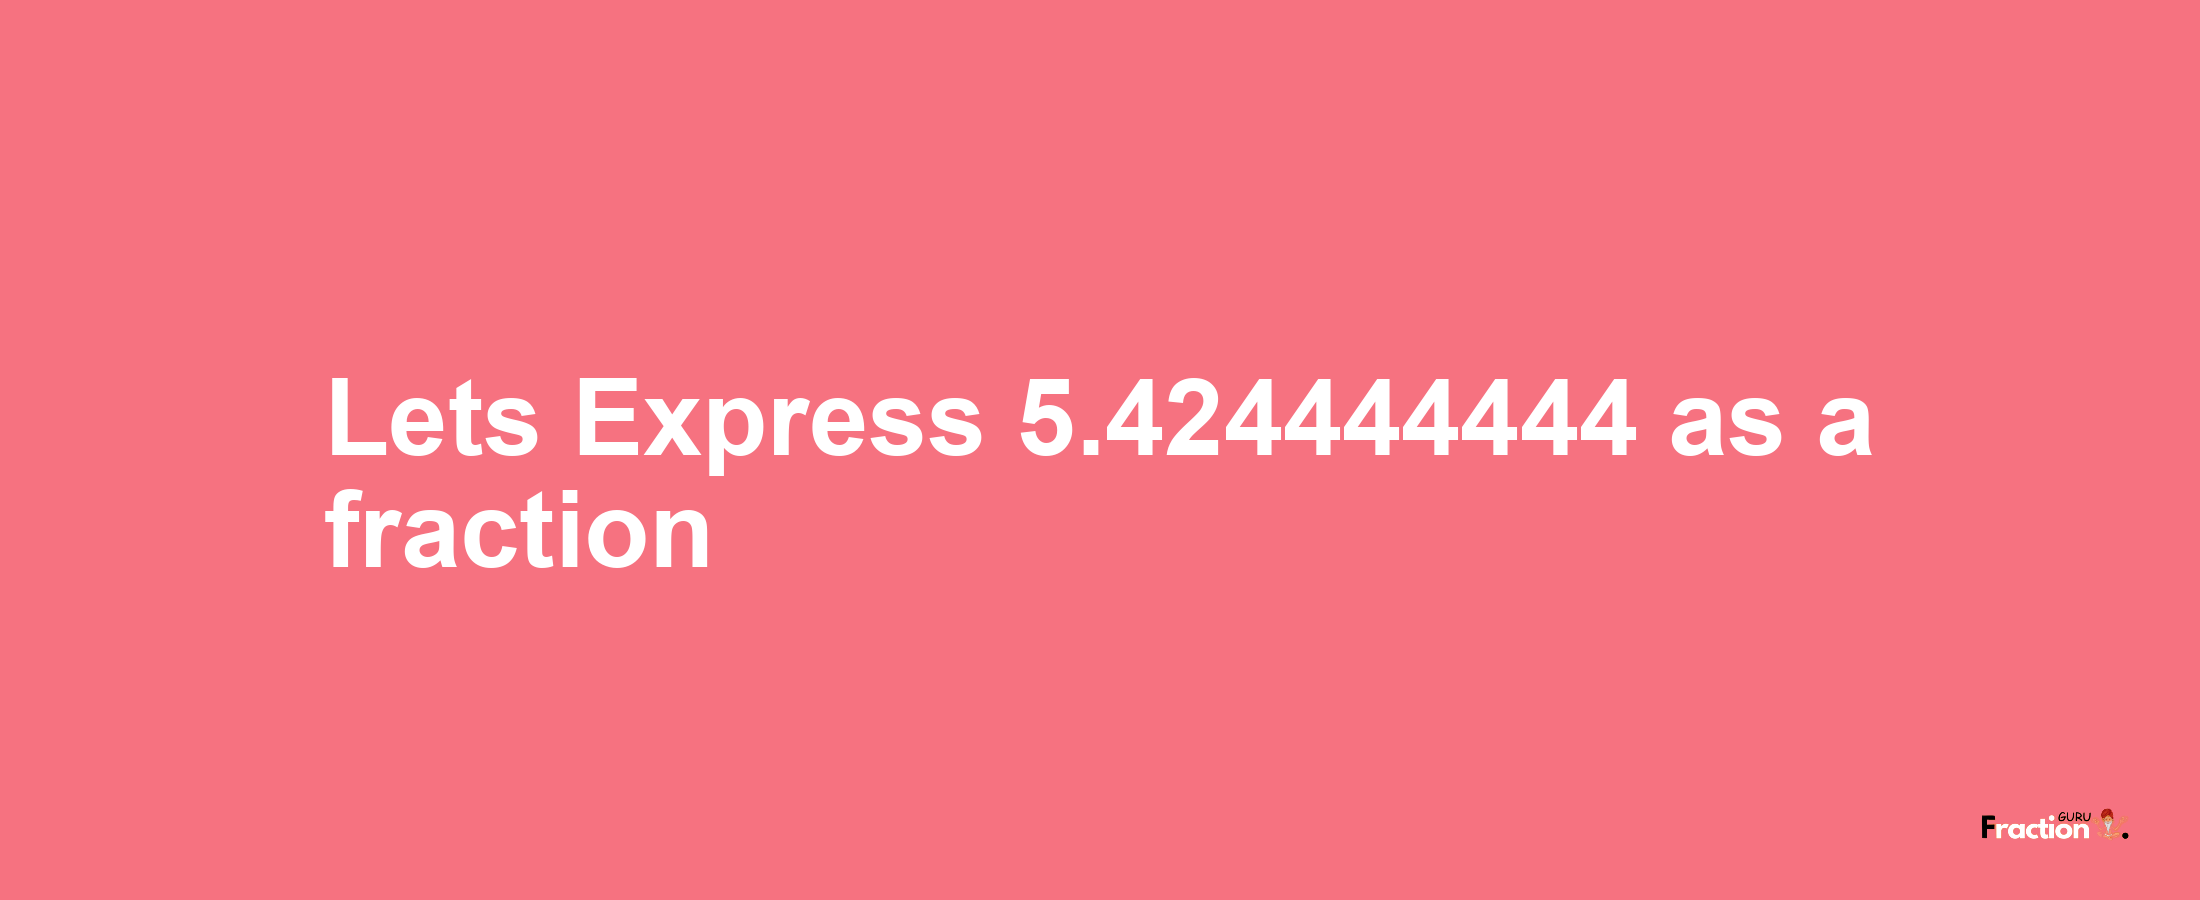 Lets Express 5.424444444 as afraction